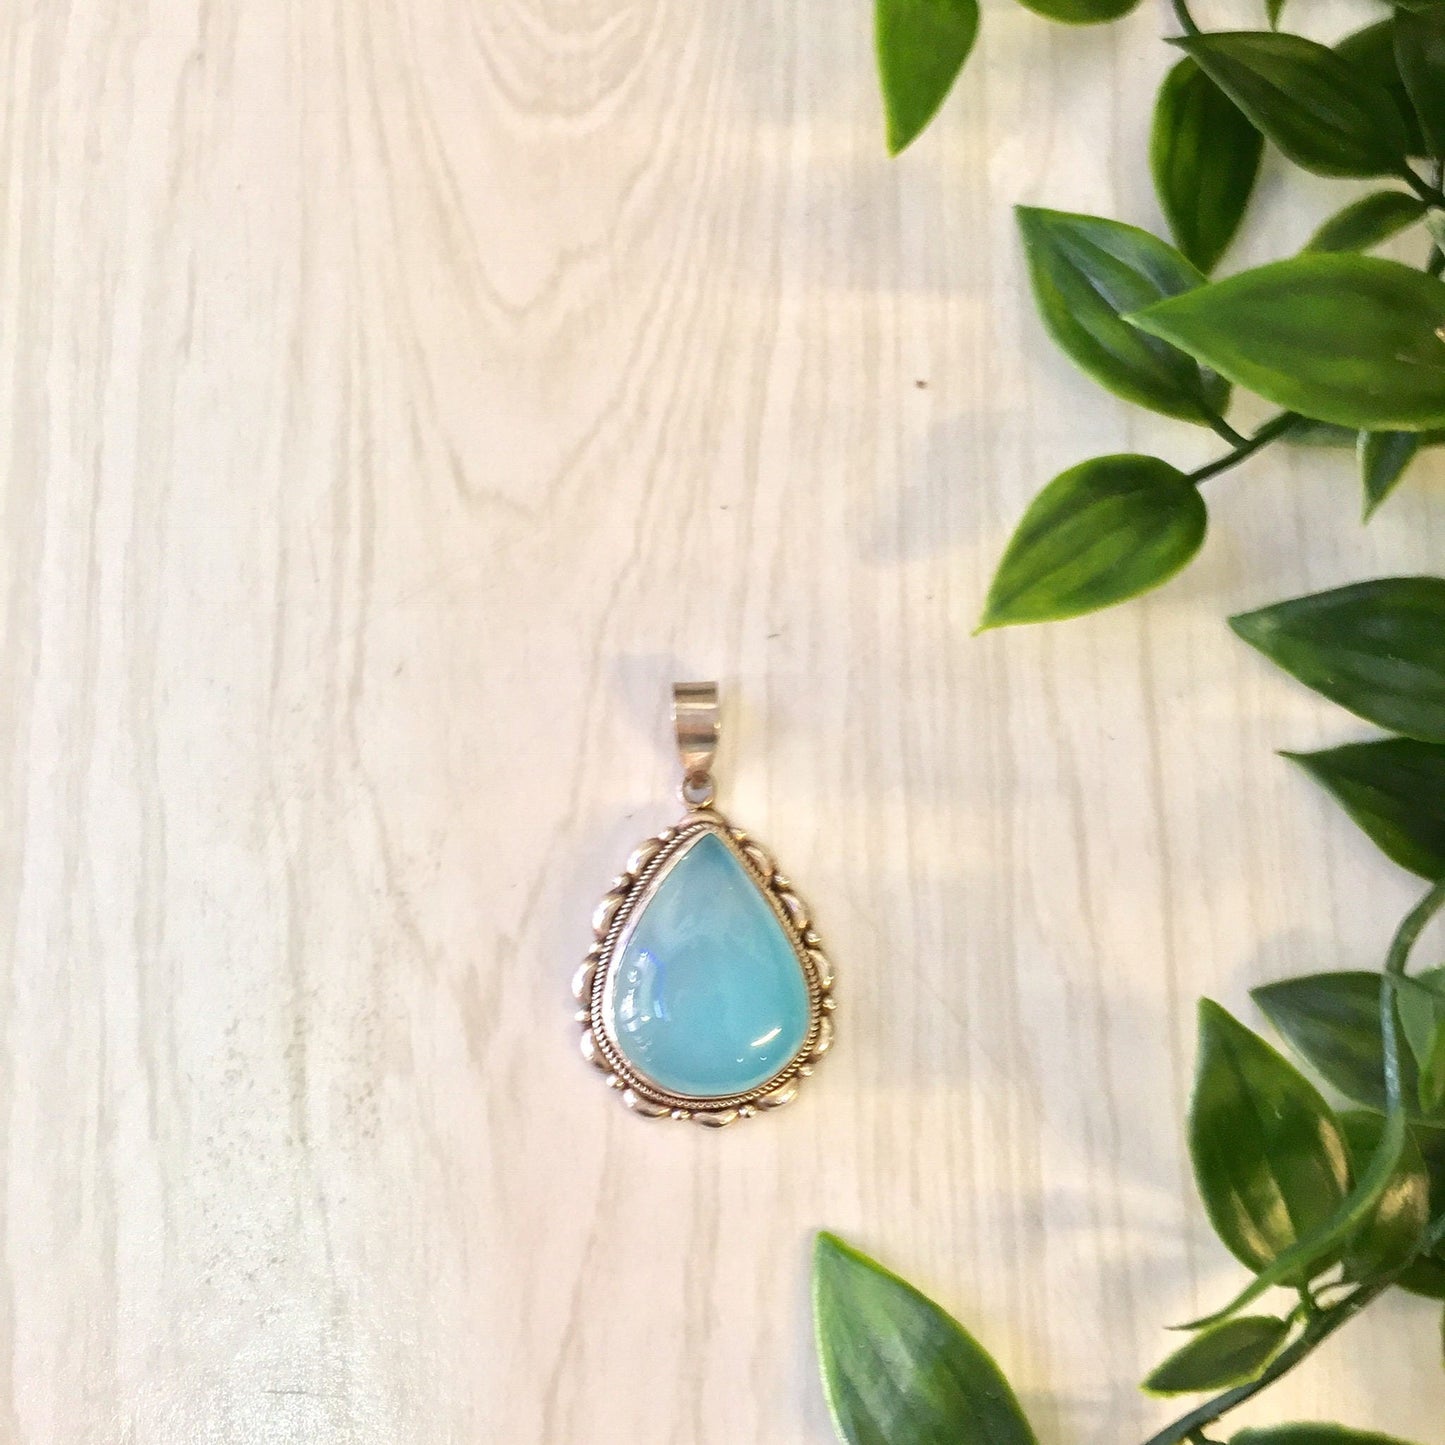 Vintage silver and opalite pendant necklace with blue and green hues on a wooden surface surrounded by green leaves.